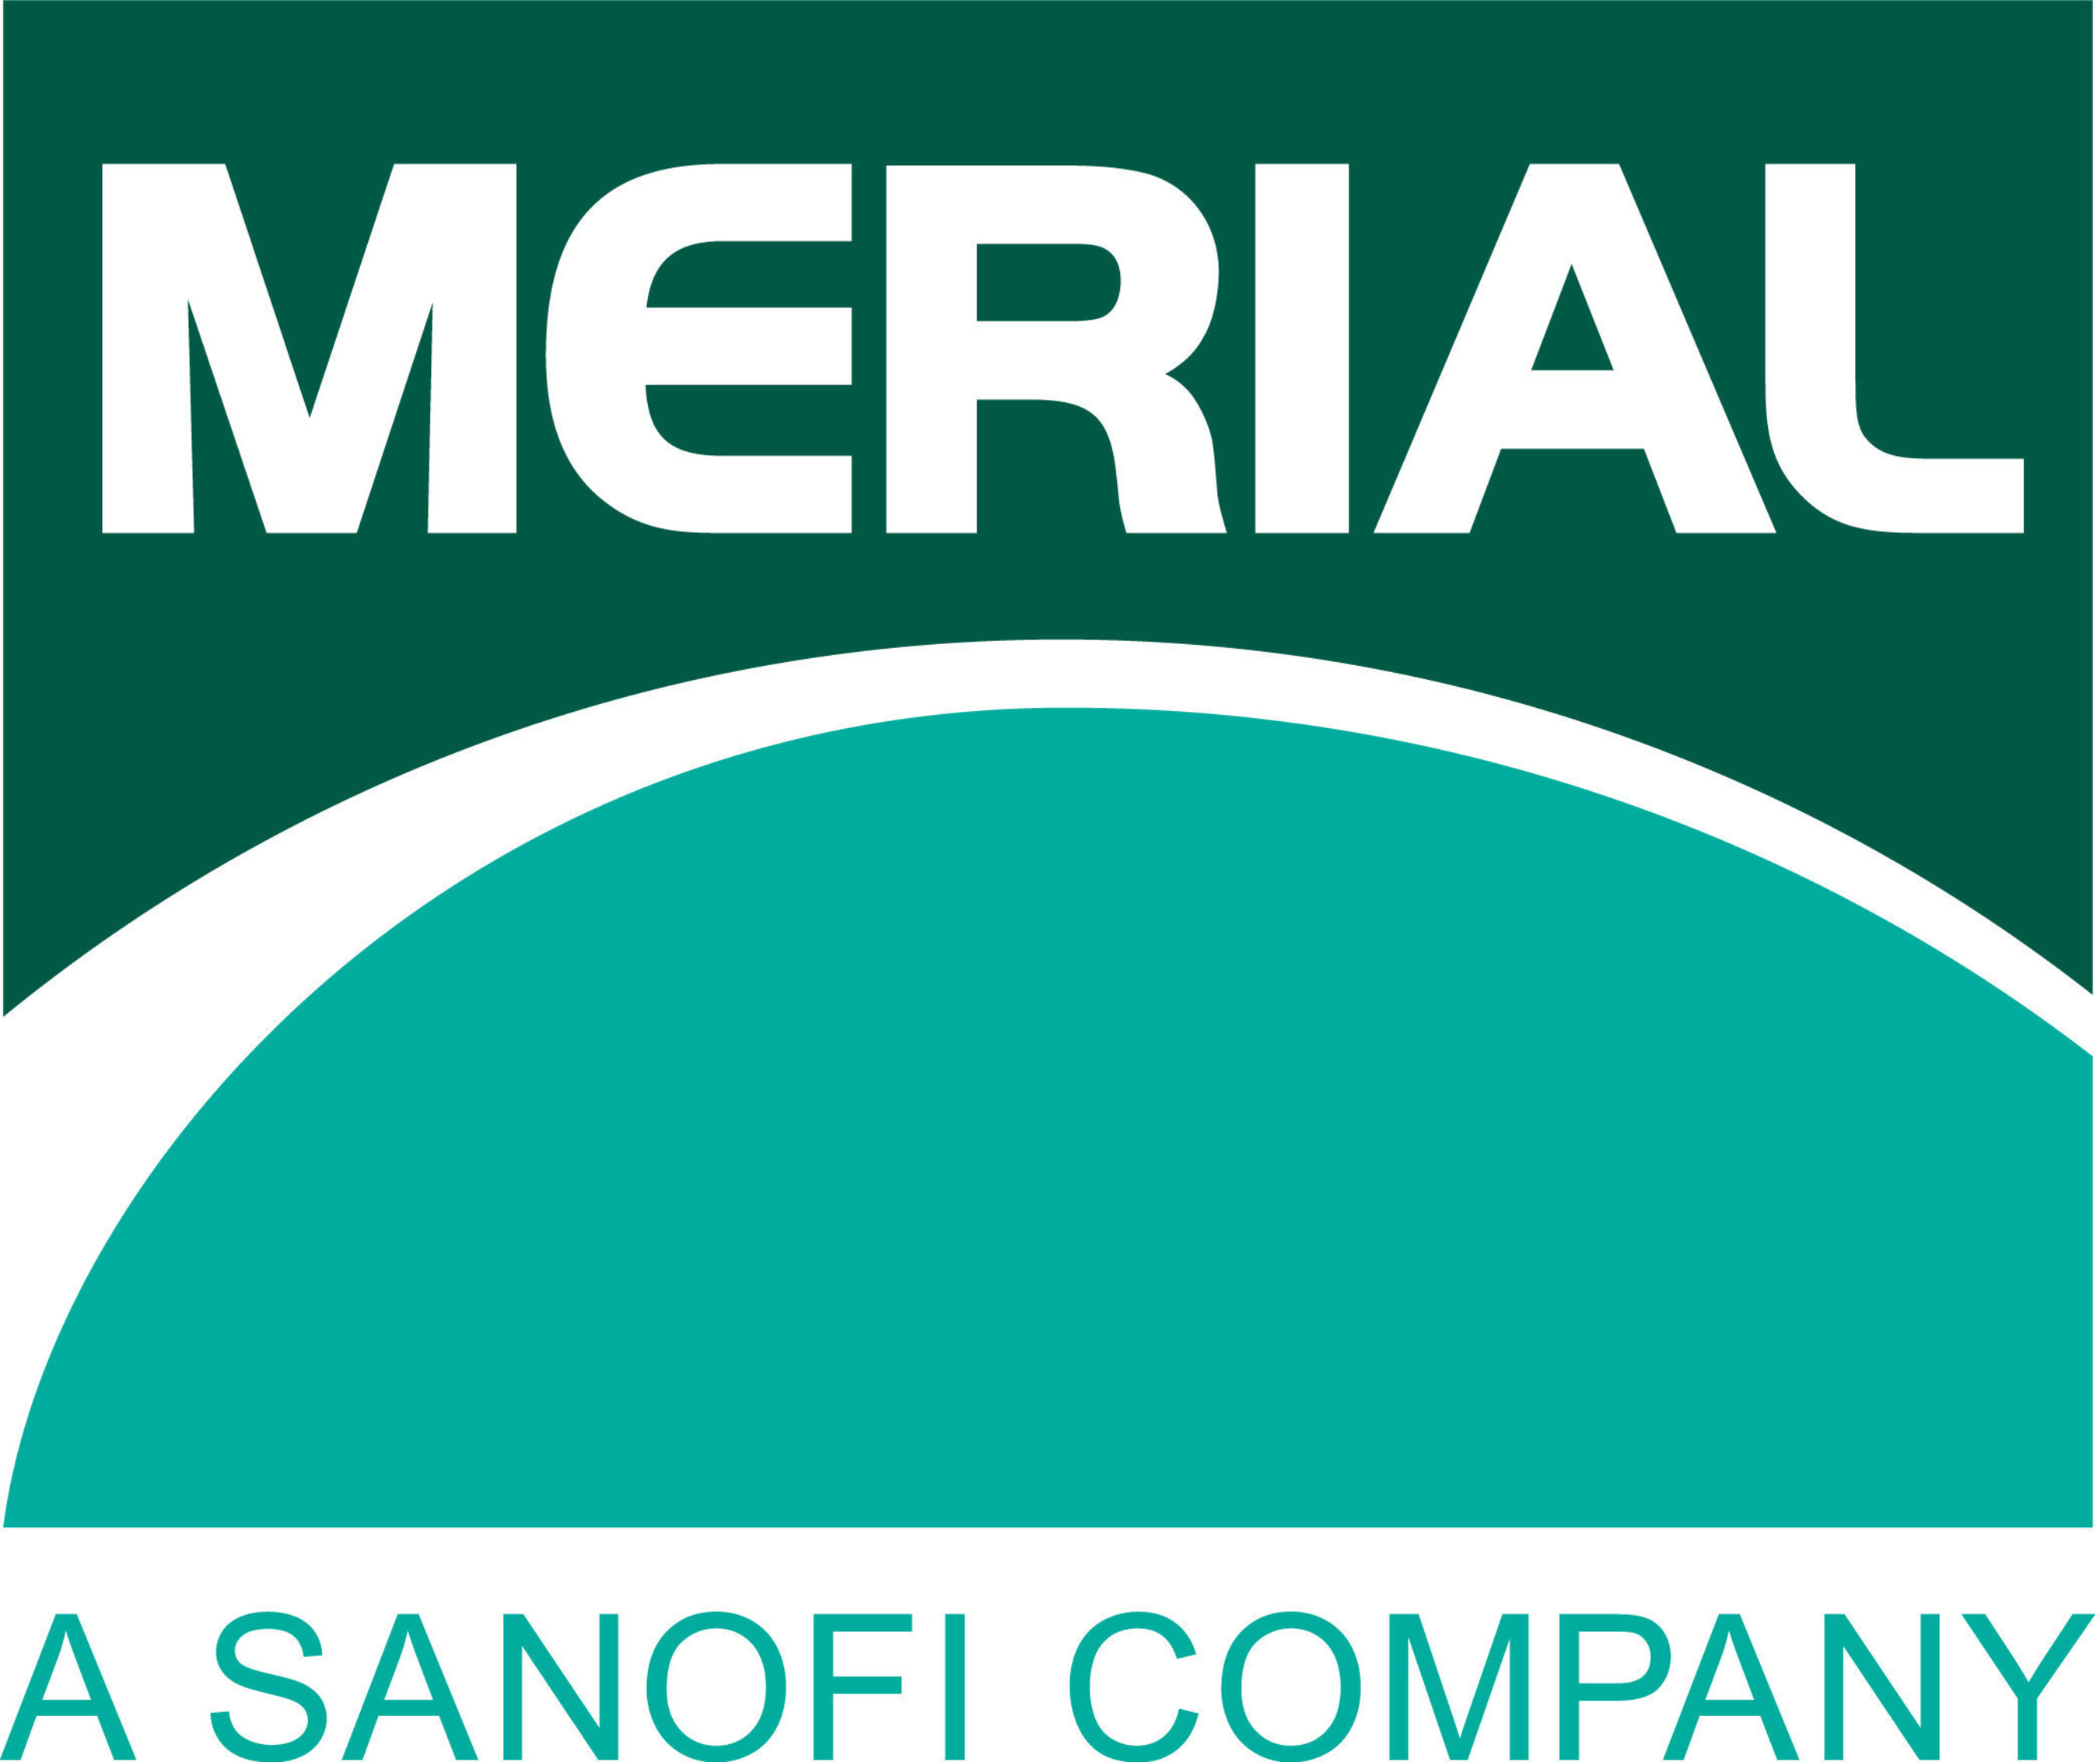 Merial is a world-leading, innovation-driven animal health company, providing a comprehensive range of products to enhance the health and well-being of a wide range of animals. Merial is a Sanofi company. For more information, please see www.merial.com